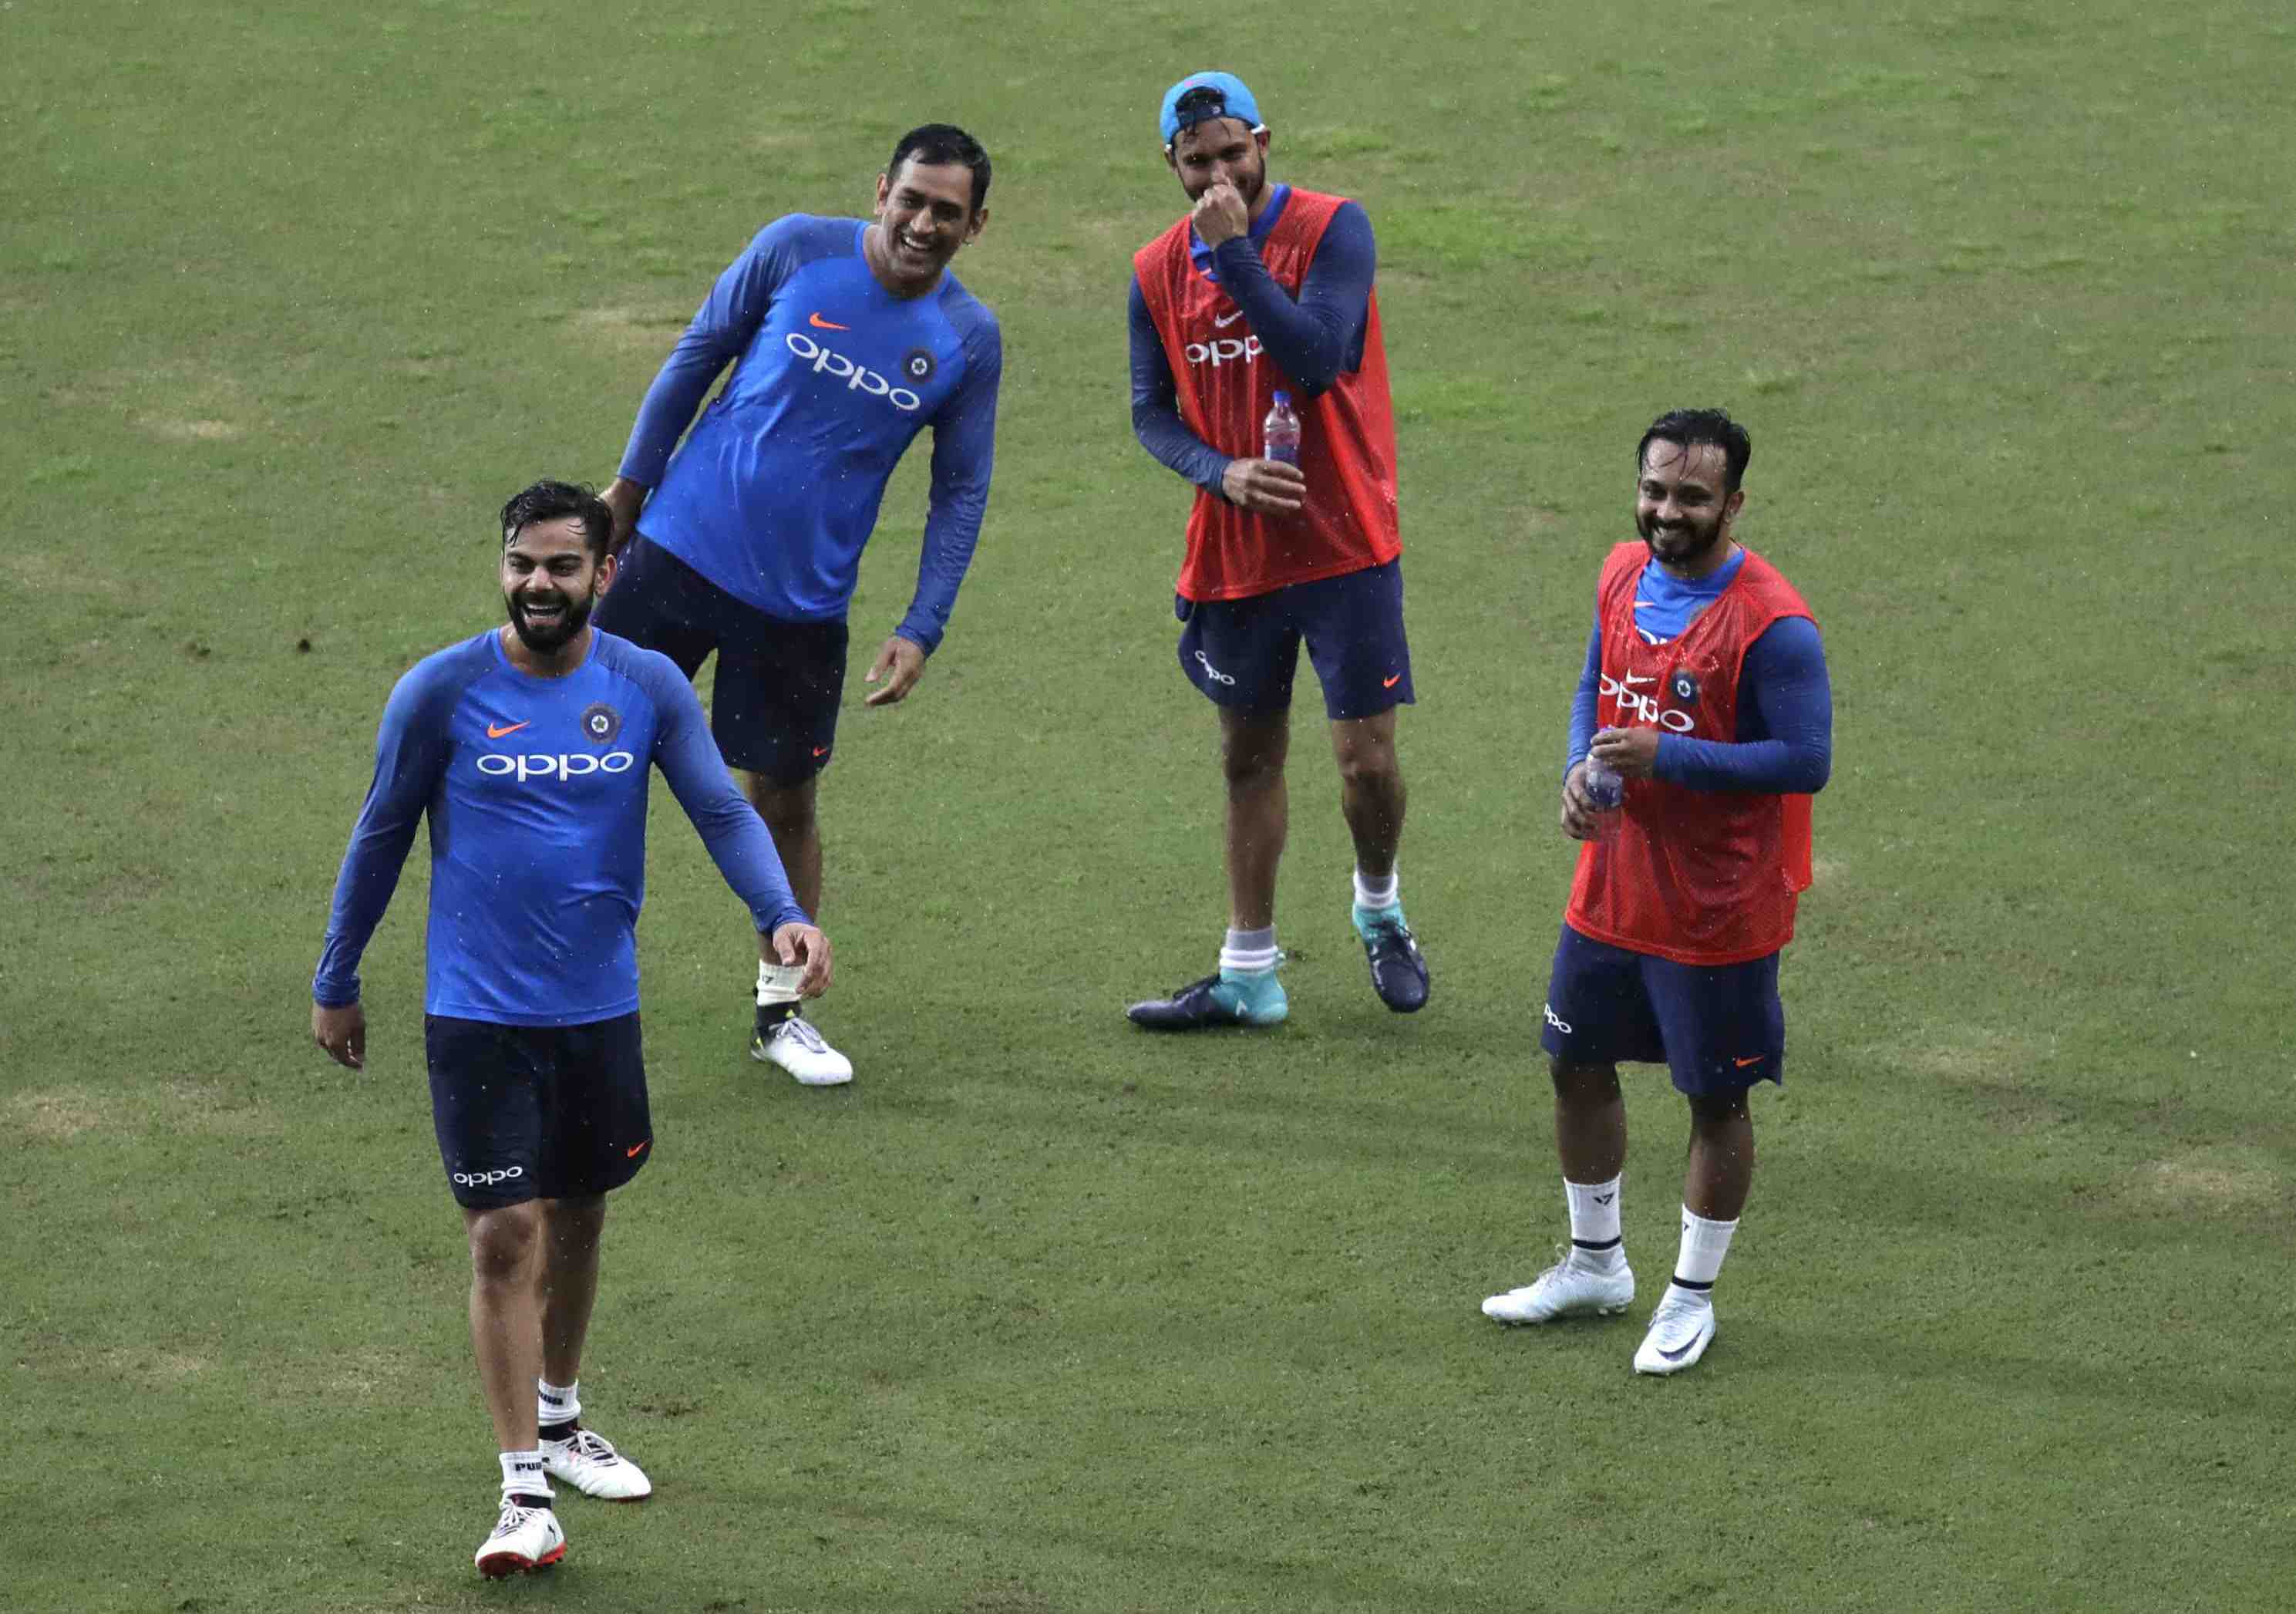 Will BCCI’s over-reliance on Yo-yo test bid well for Indian cricket’s future